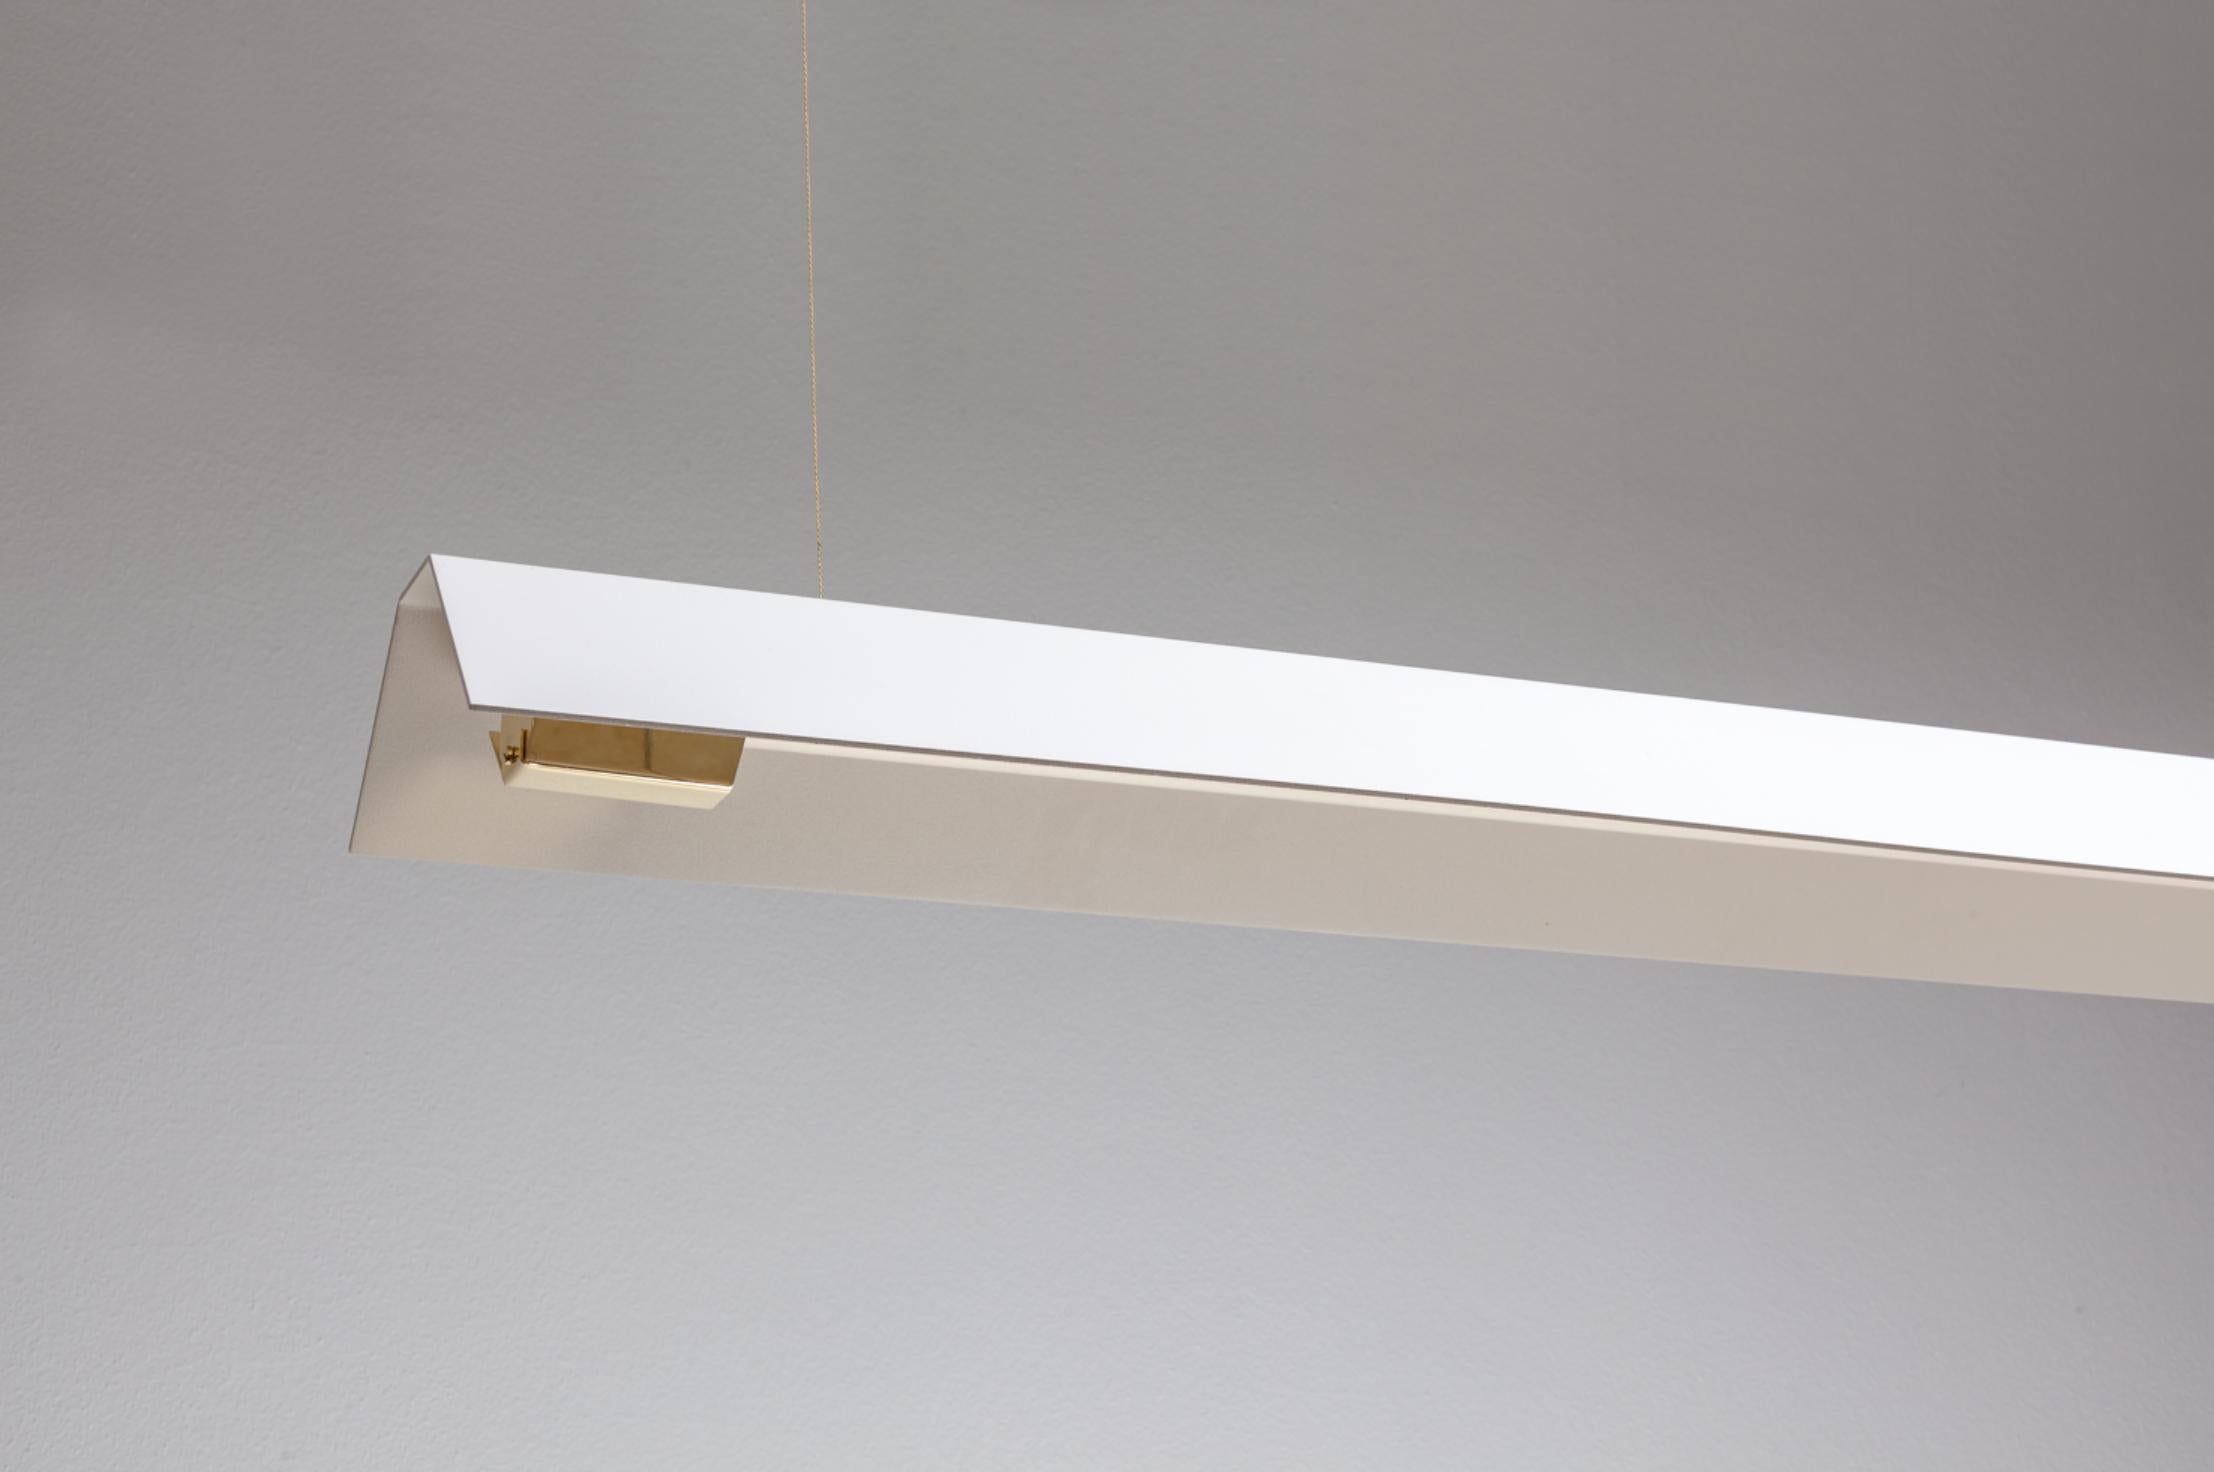 Extra Large Misalliance Ex pure white suspended light by Lexavala.
Dimensions: D 16 x W 160 x H 8 cm.
Materials: powder coated shade with details made of brass or stainless steel.

There are two lenghts of socket covers, extending over the LED.